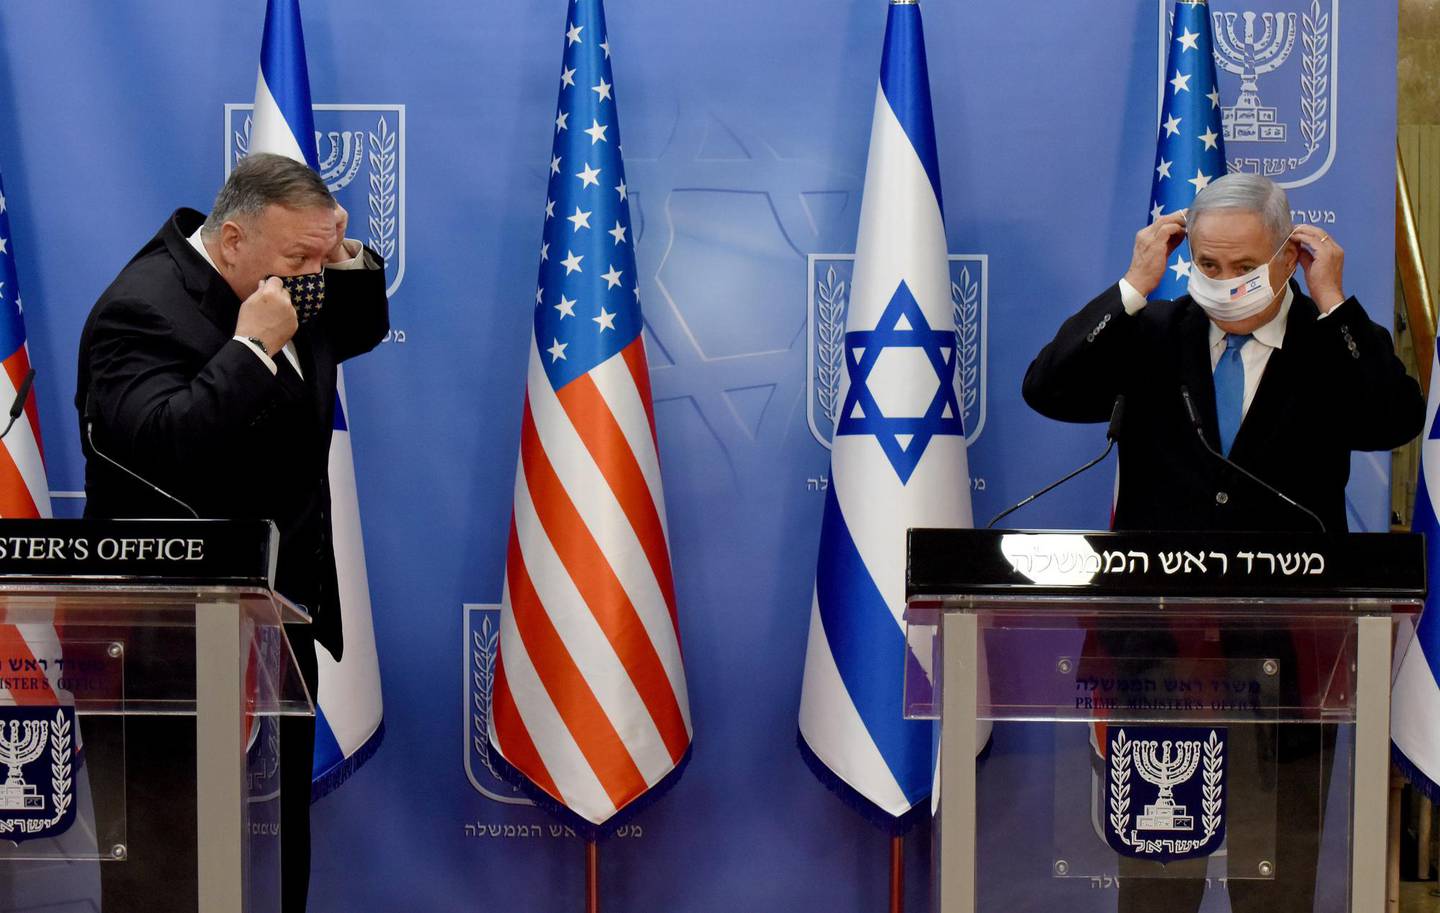 U.S. Secretary of State Mike Pompeo and Israeli Prime Minister Benjamin Netanyahu wear face masks after  a joint news conference in Jerusalem, August 24, 2020. Debbie Hill/Pool via REUTERS